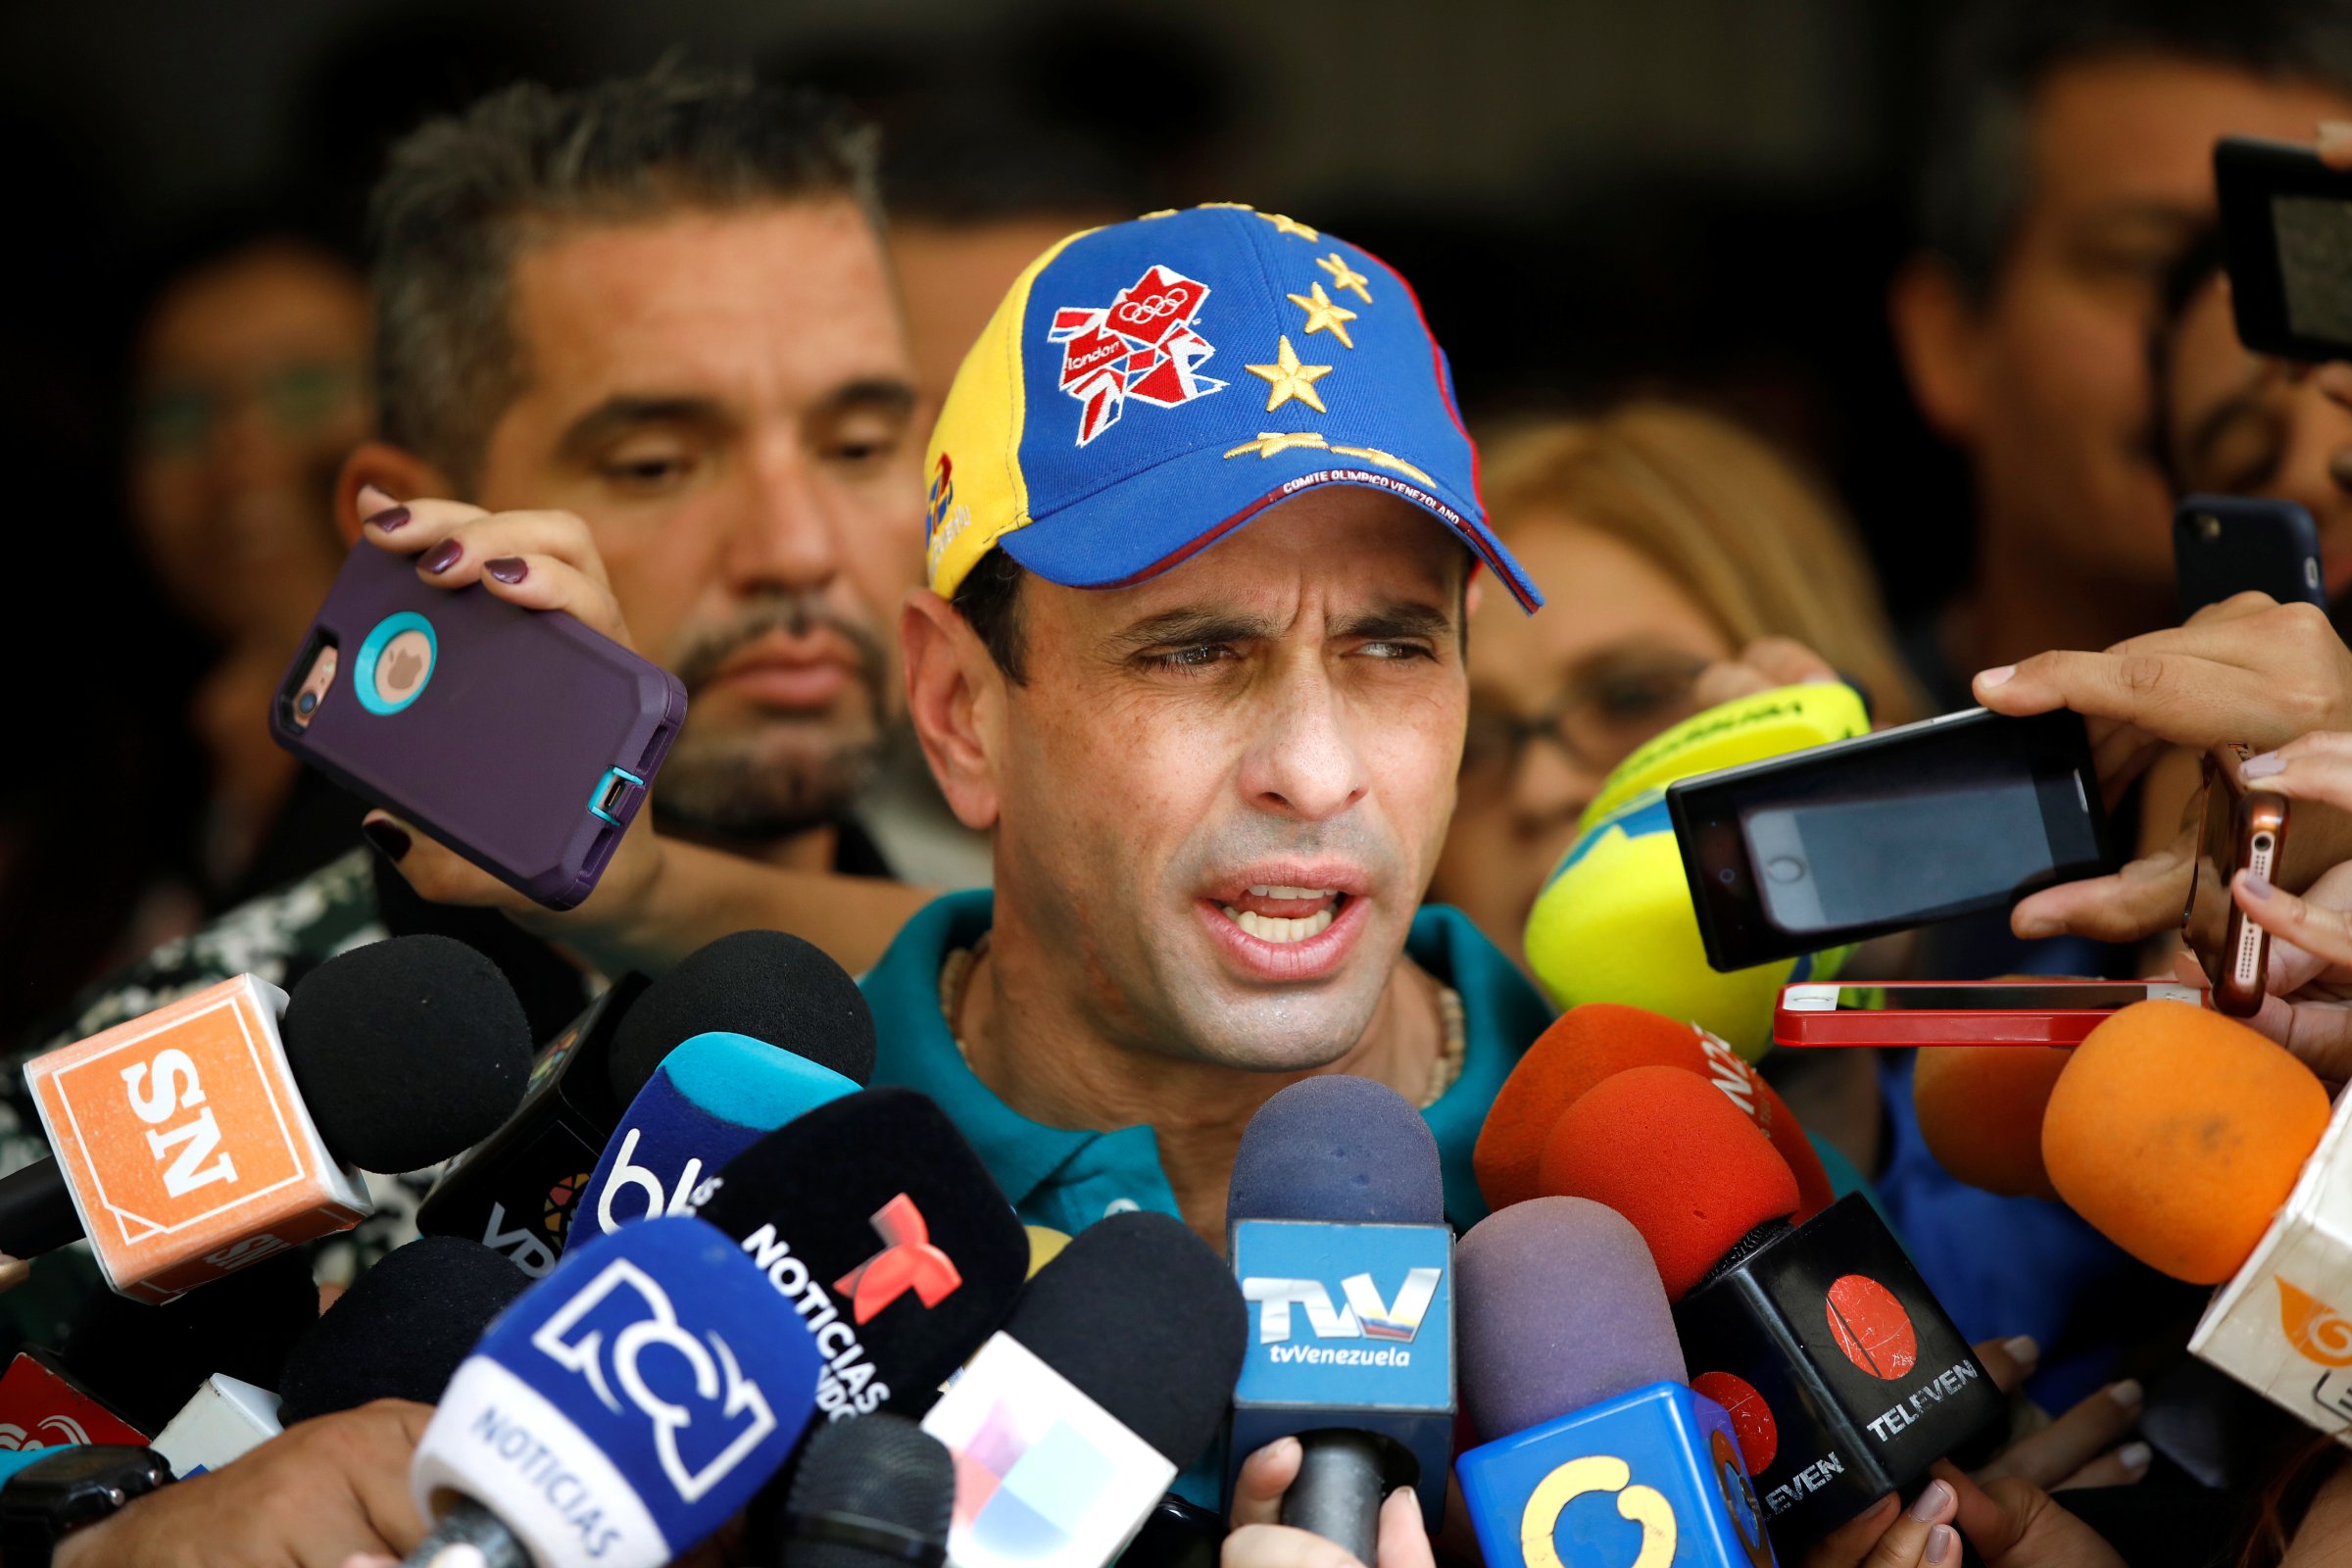 Venezuela's opposition leader Henrique Capriles speaks to the media after casting his vote during a nationwide elections for new governors in Caracas